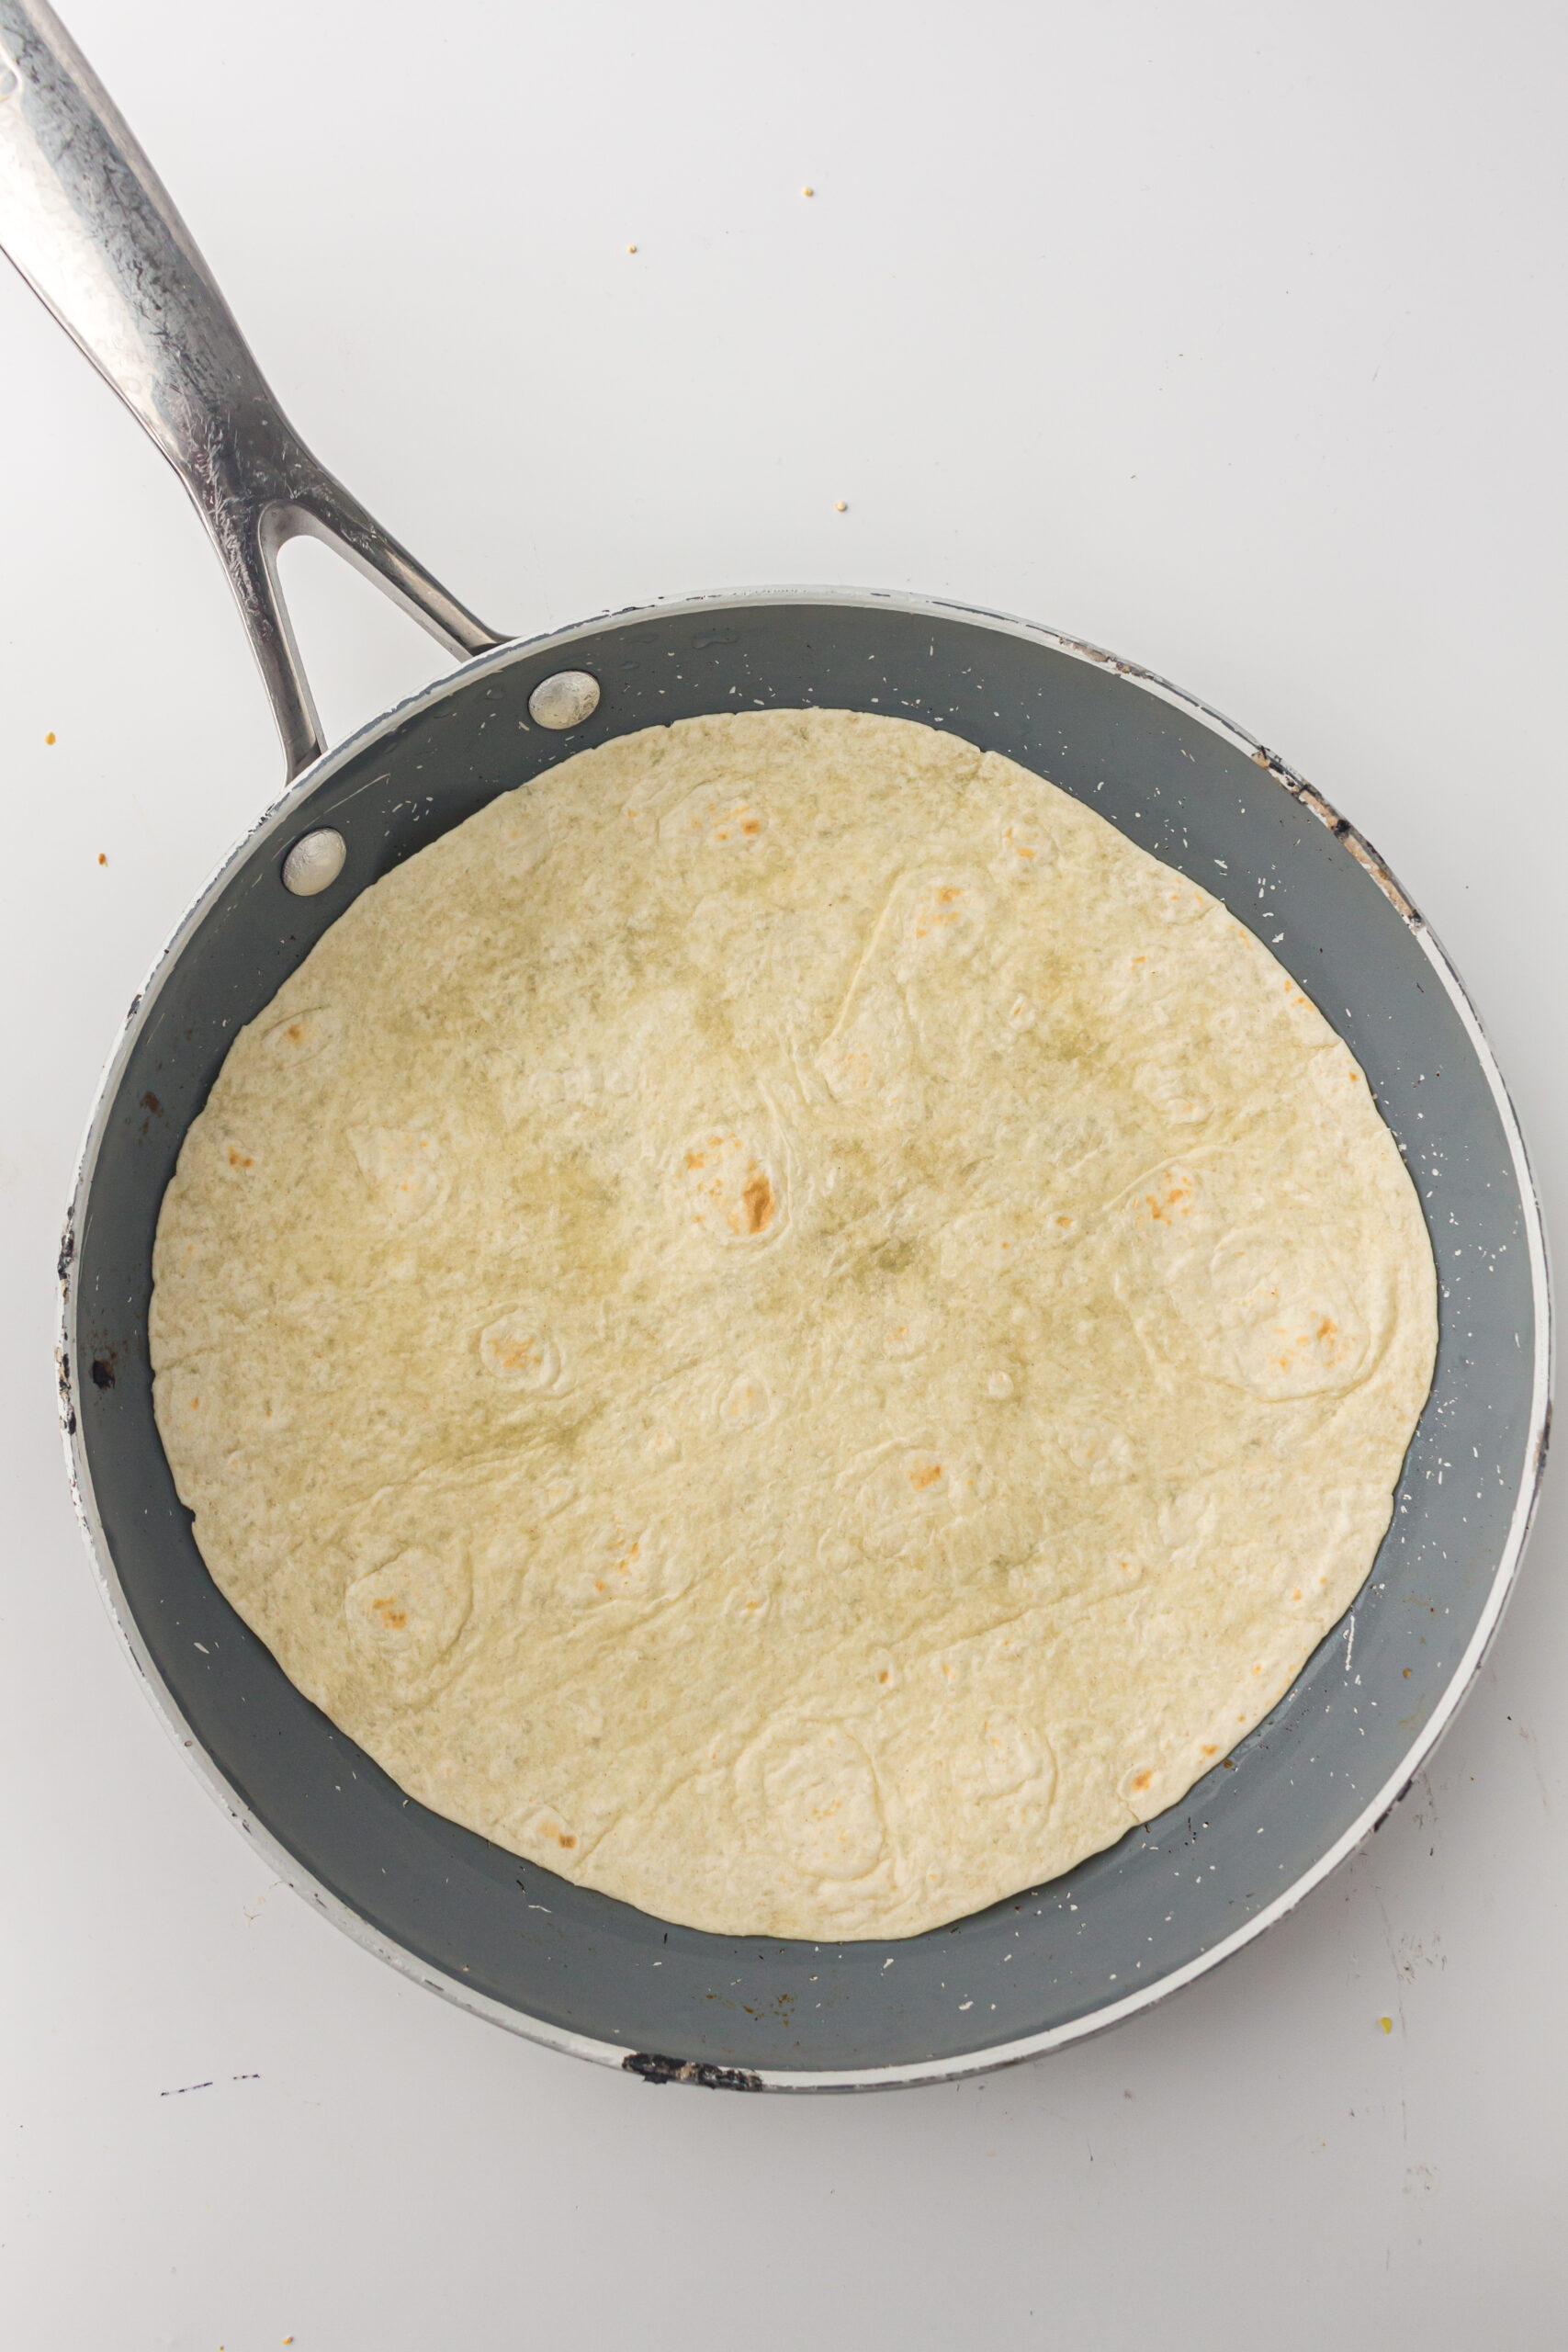 Place the tortilla in the pan